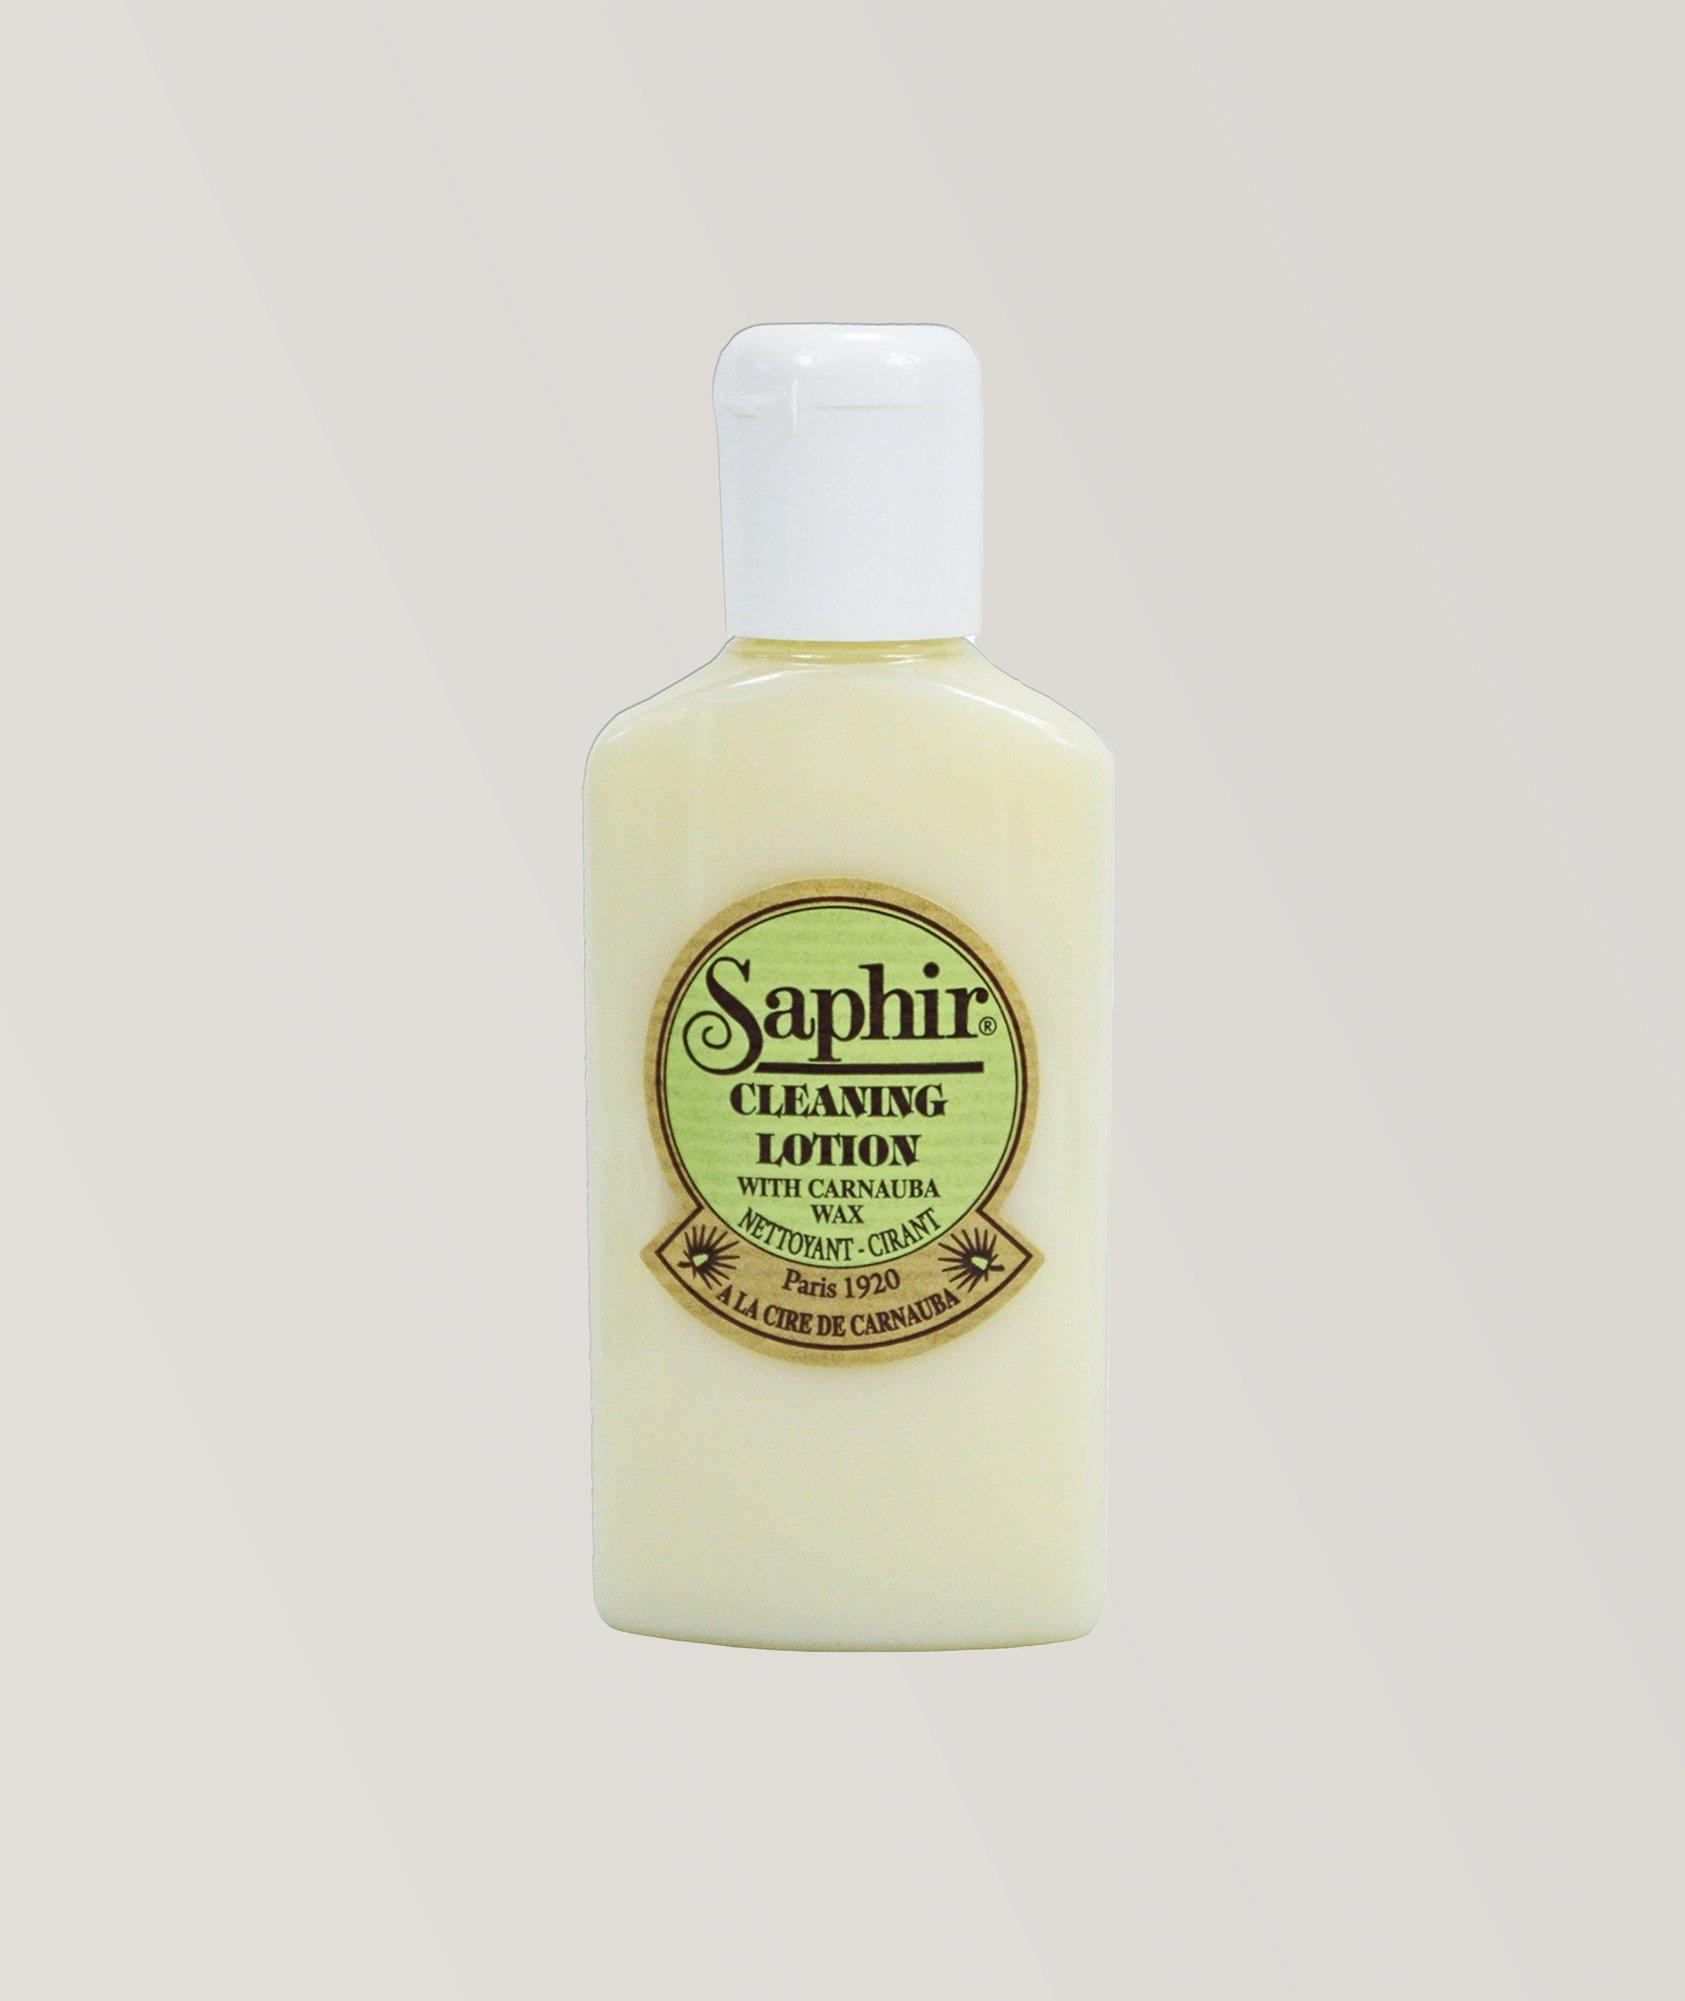 Saphir Leather Cleaning Lotion